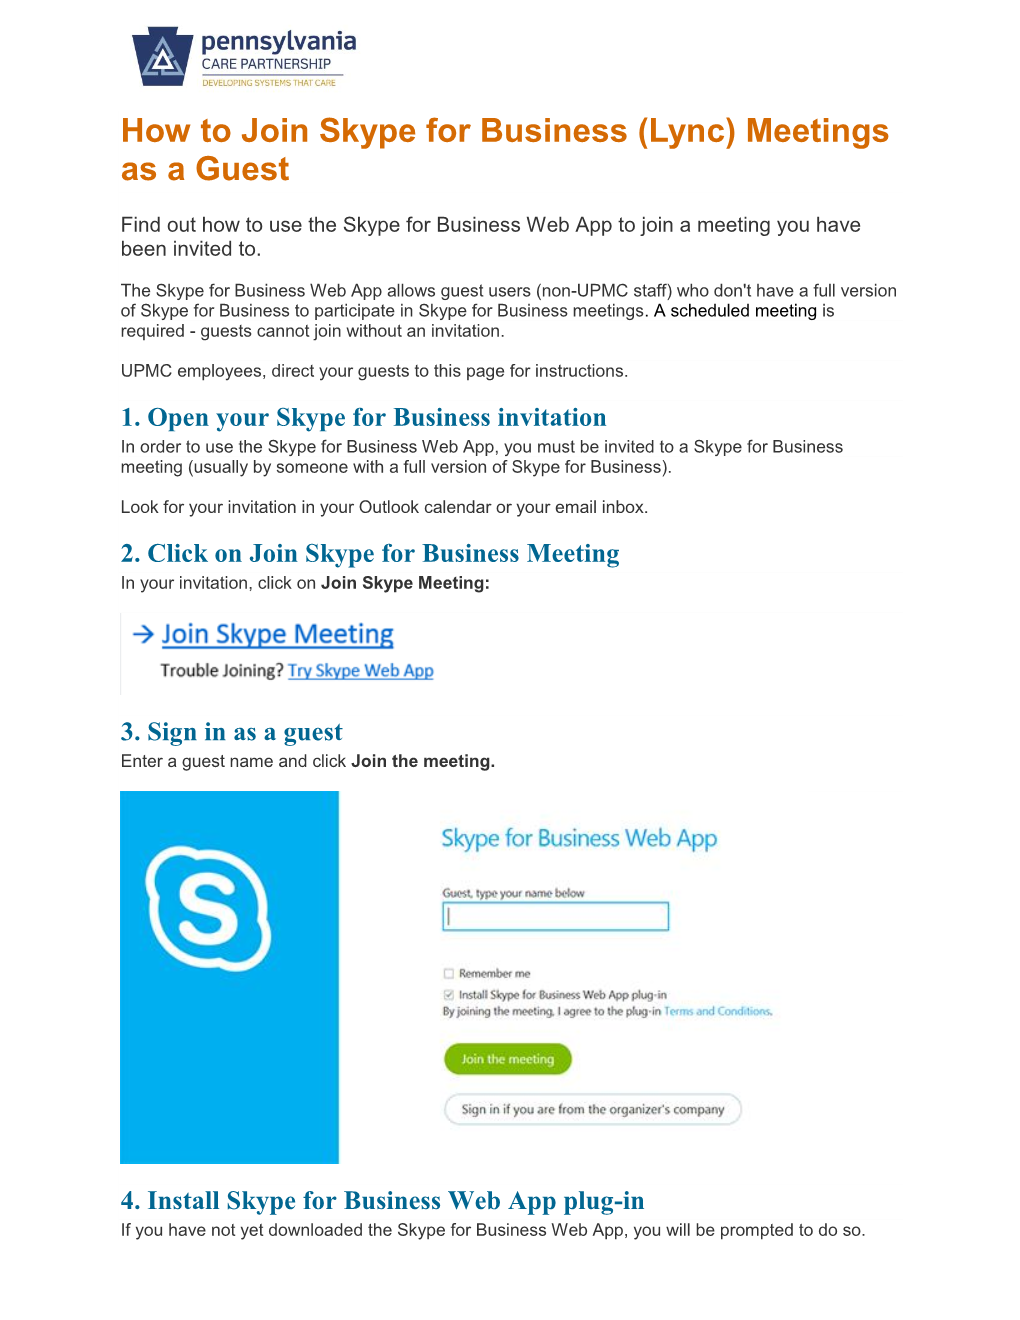 How to Join Skype for Business (Lync) Meetings As a Guest